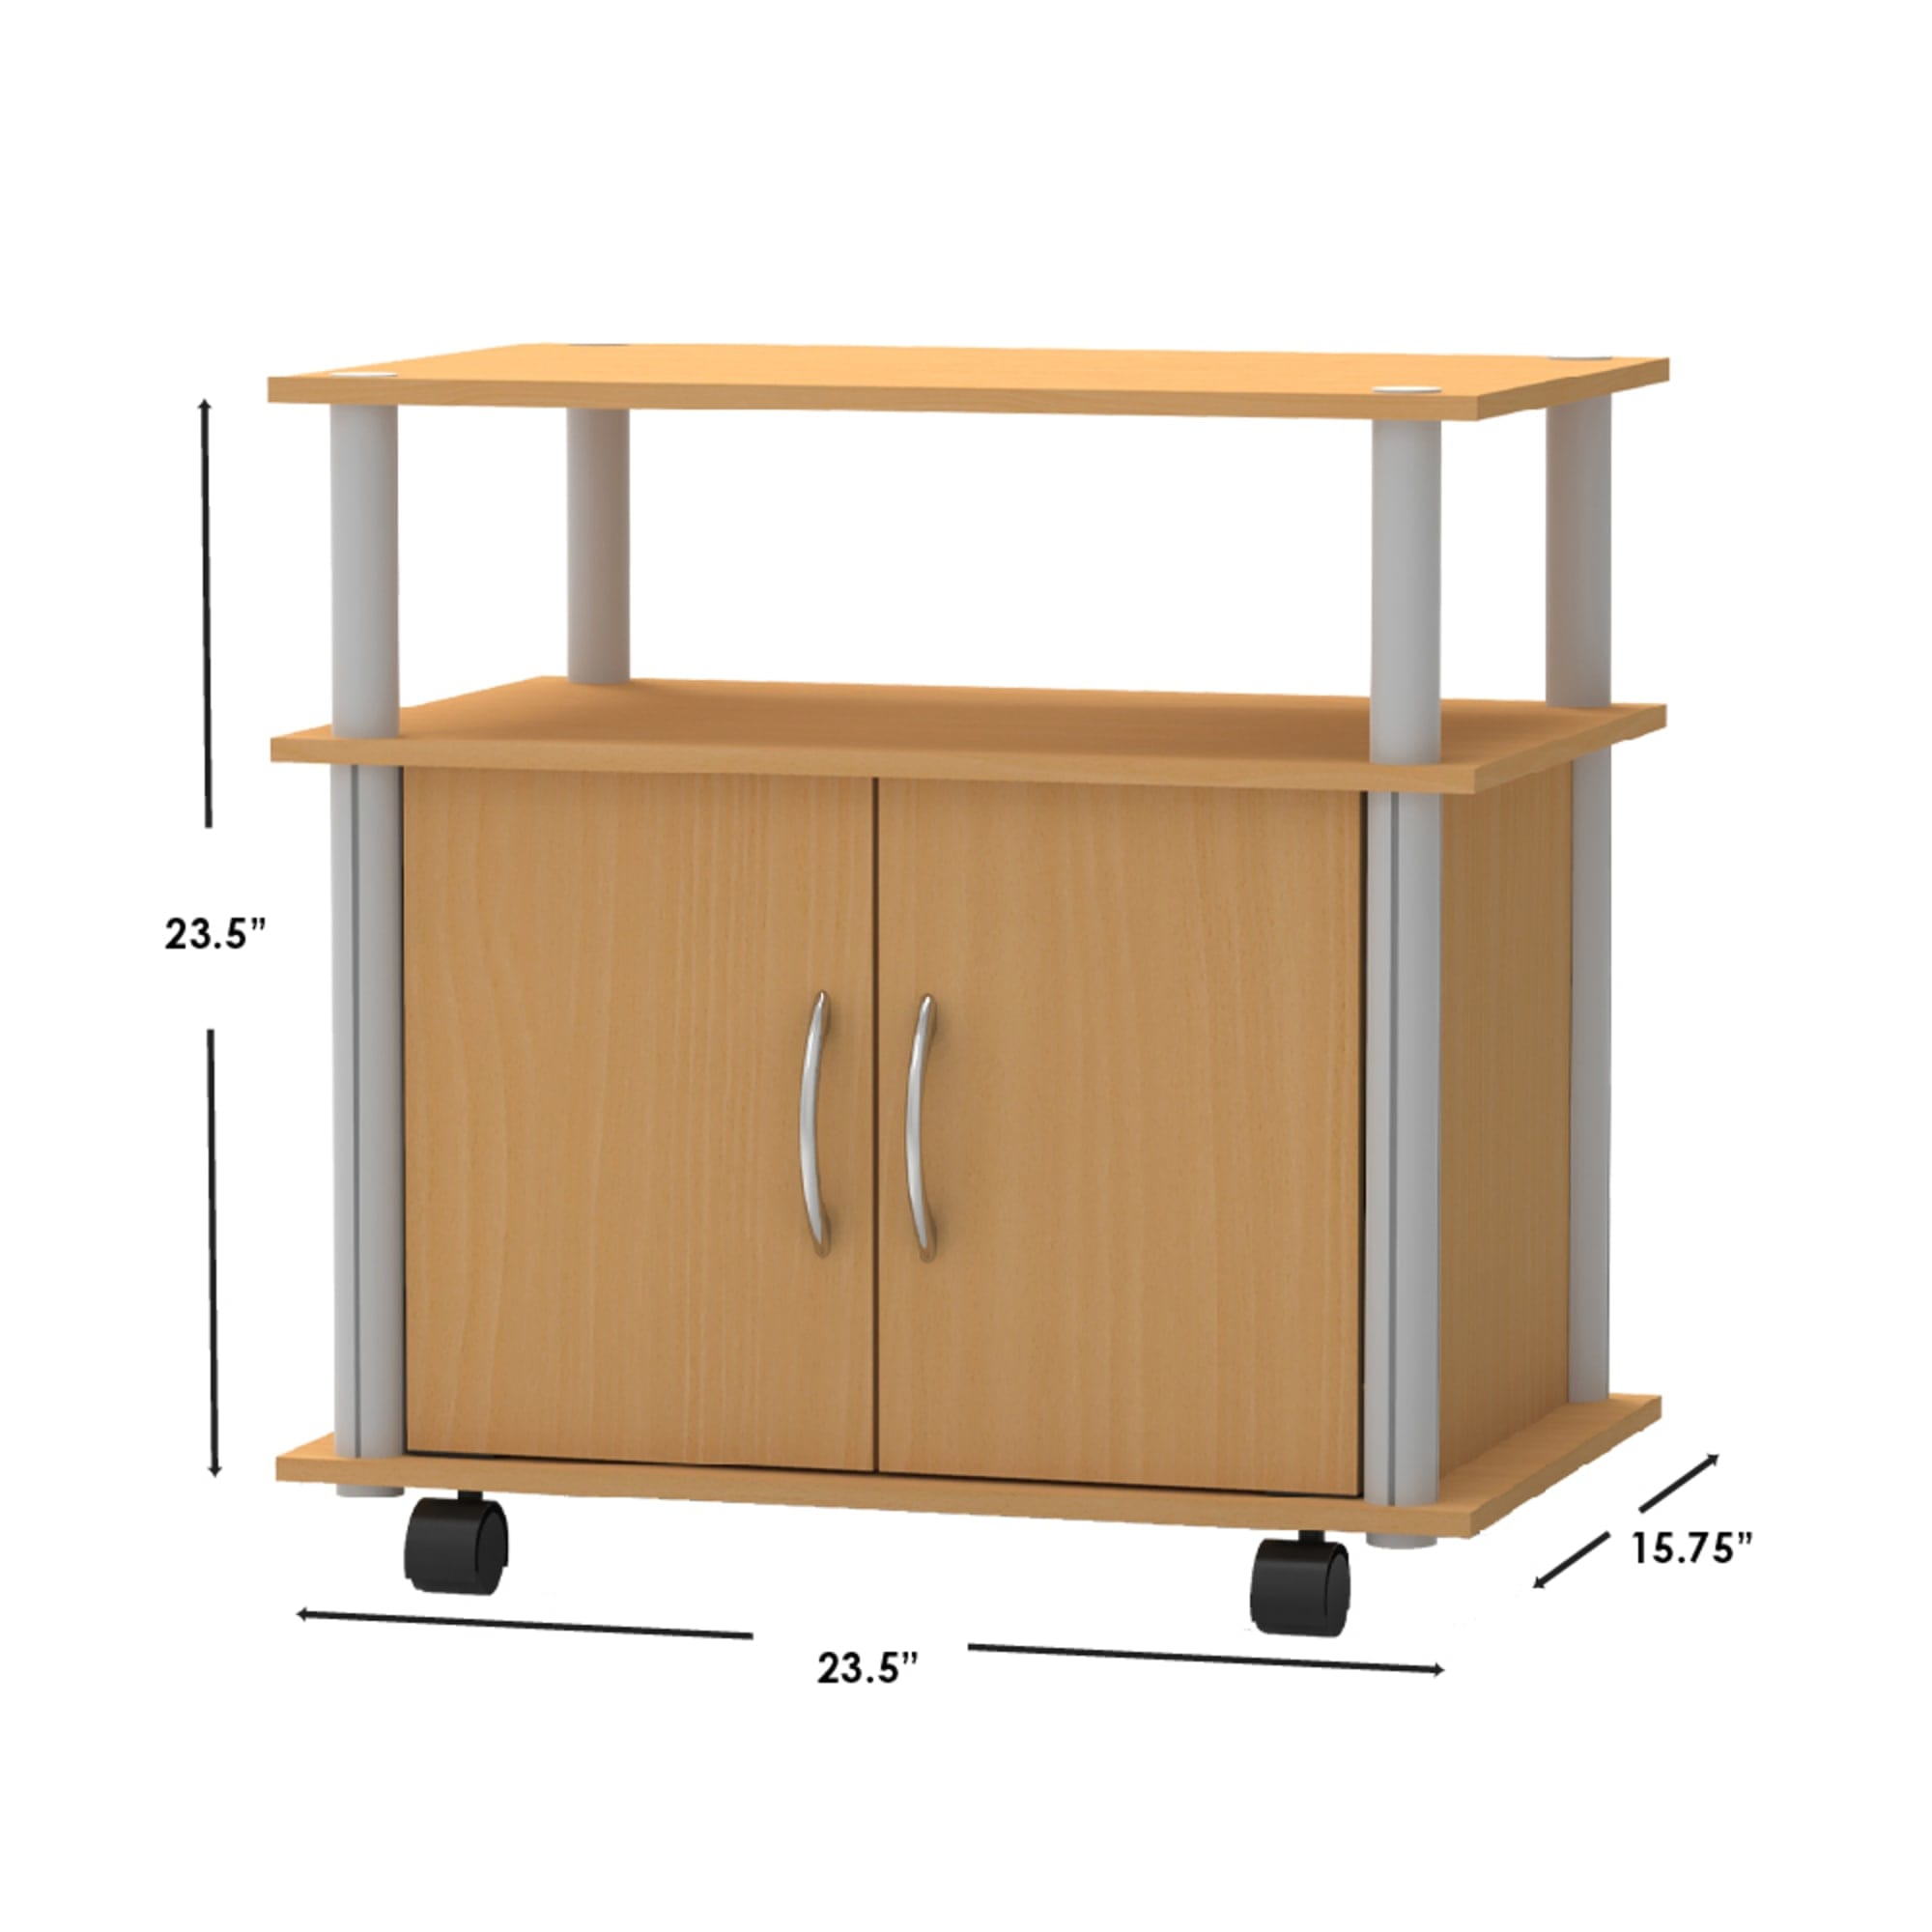 Home Basics Rolling TV Stand with Cabinet, Natural $40.00 EACH, CASE PACK OF 1